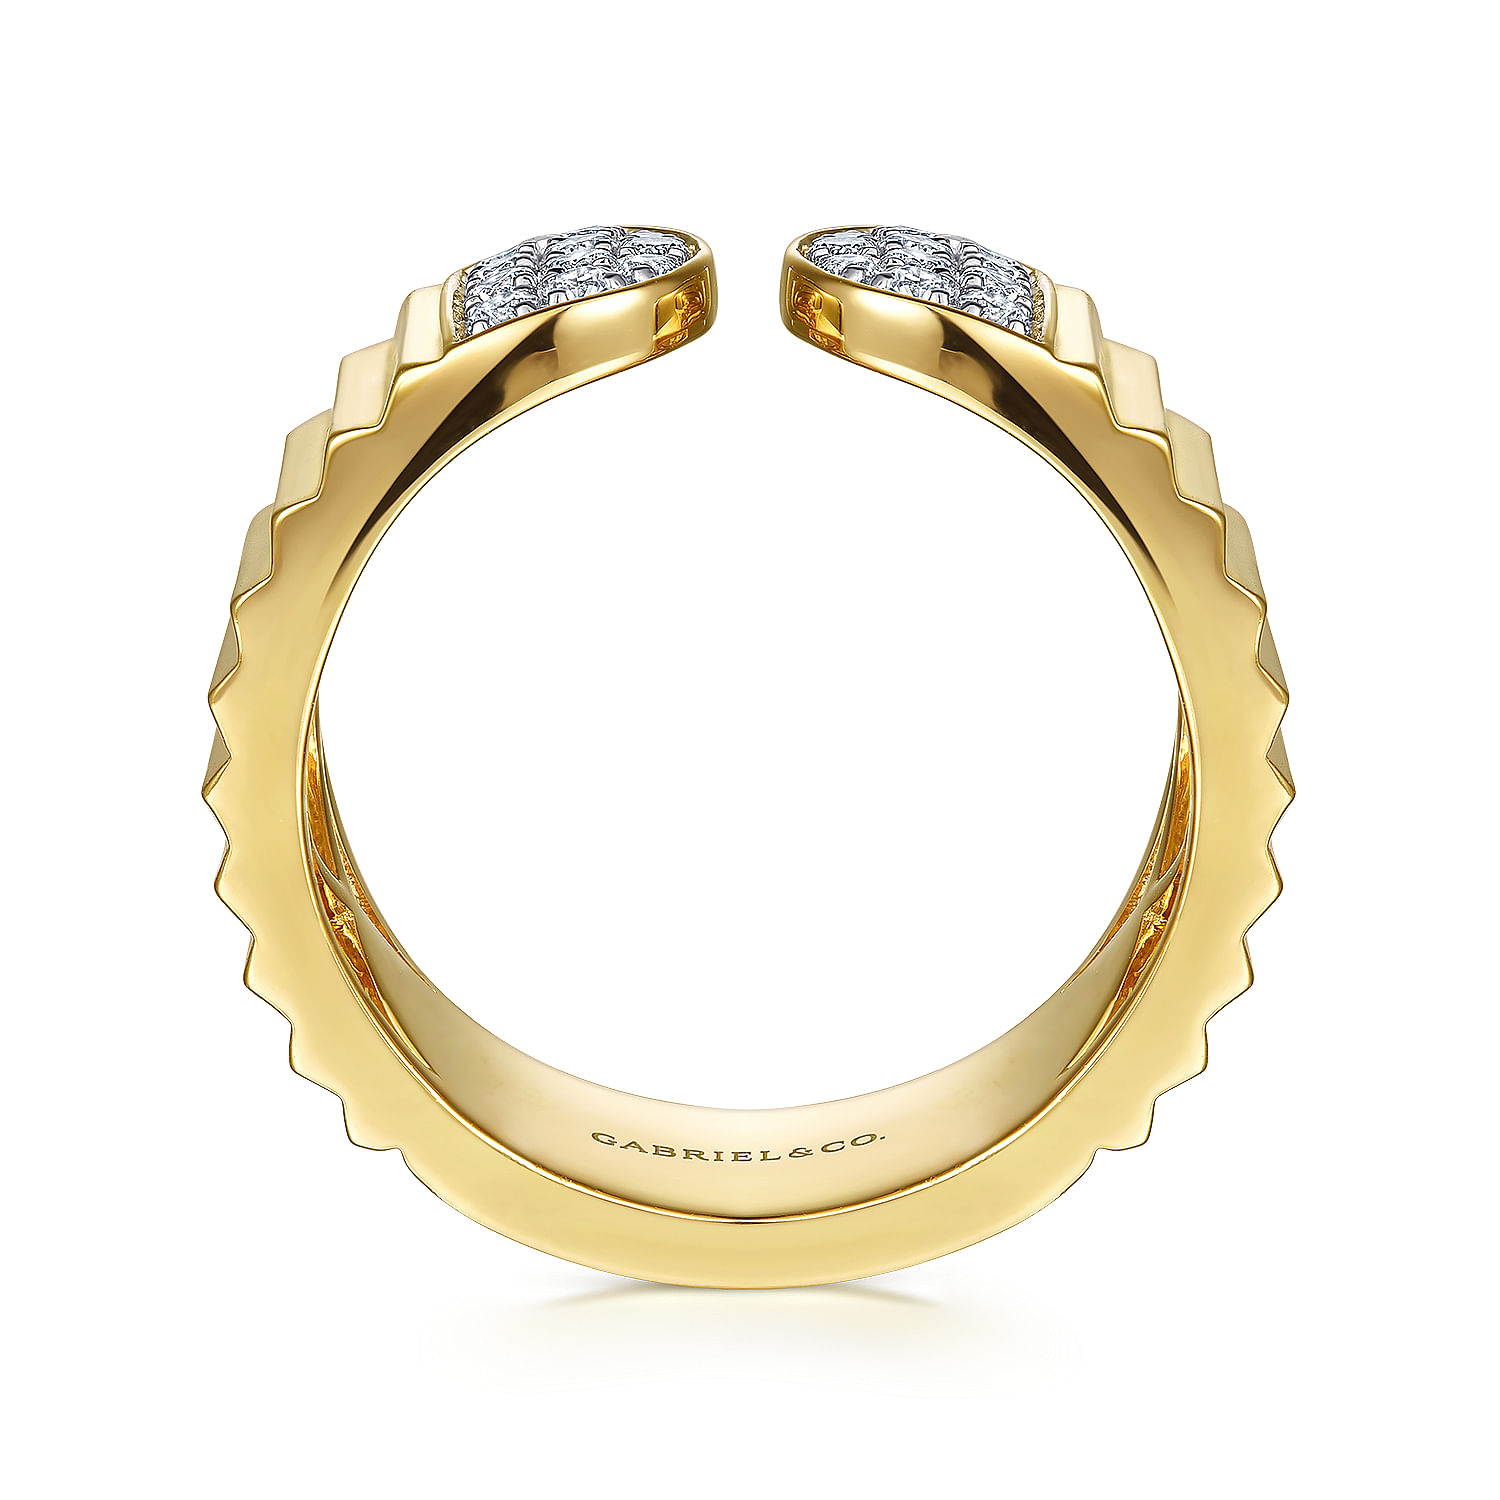 14K Yellow Gold Open Ring with Diamond Pavé End Caps and Diamond Cut Texture